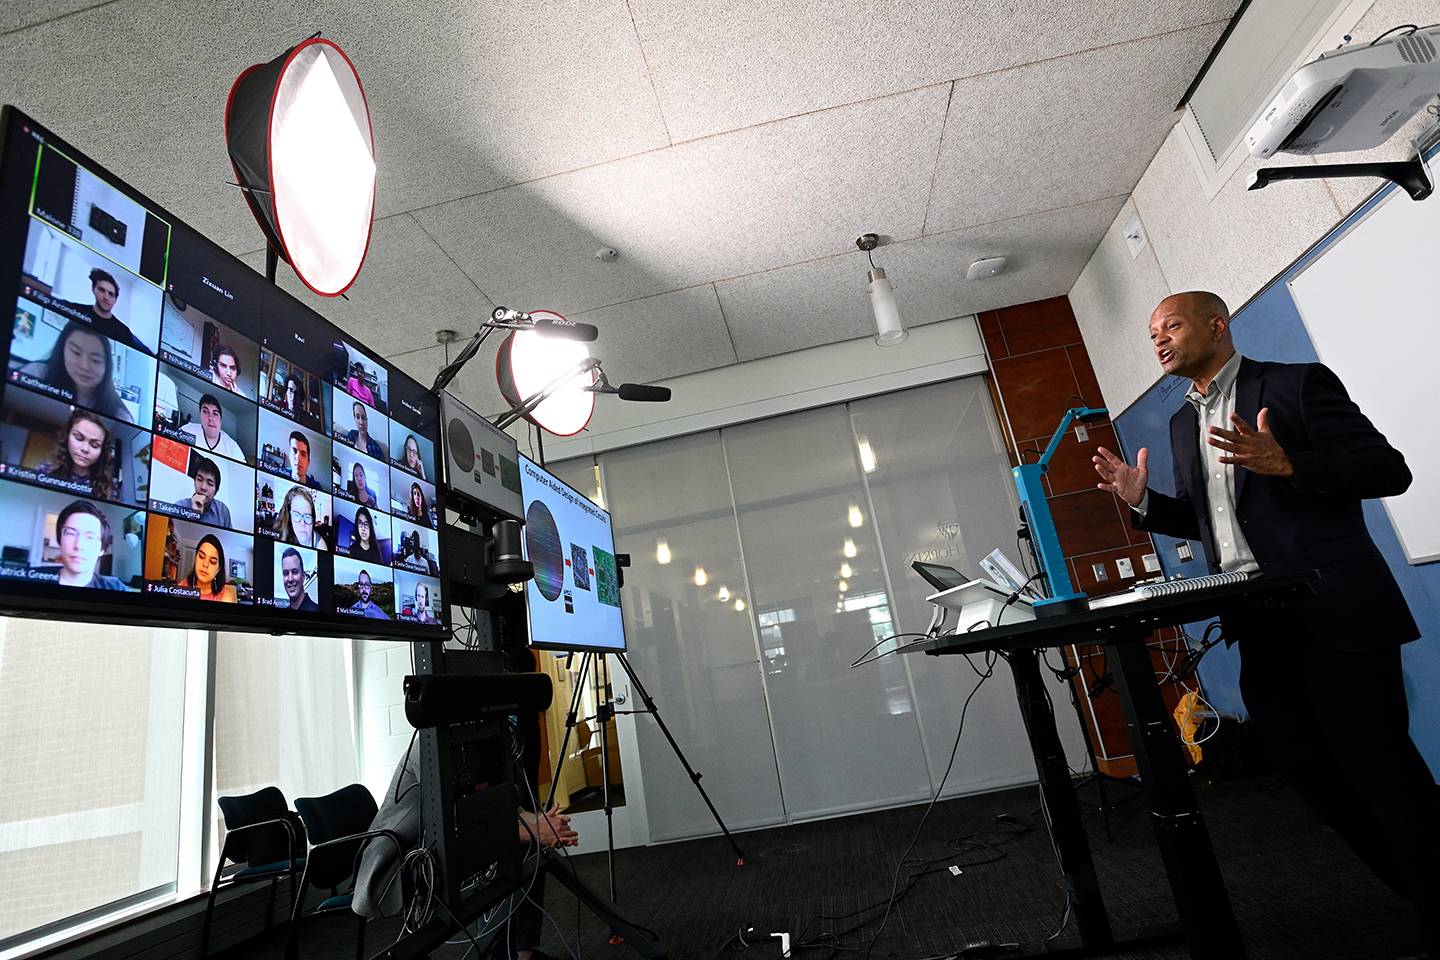 Ralph Etienne-Cummings leads a virtual class in new video studios specially designed for remote instruction